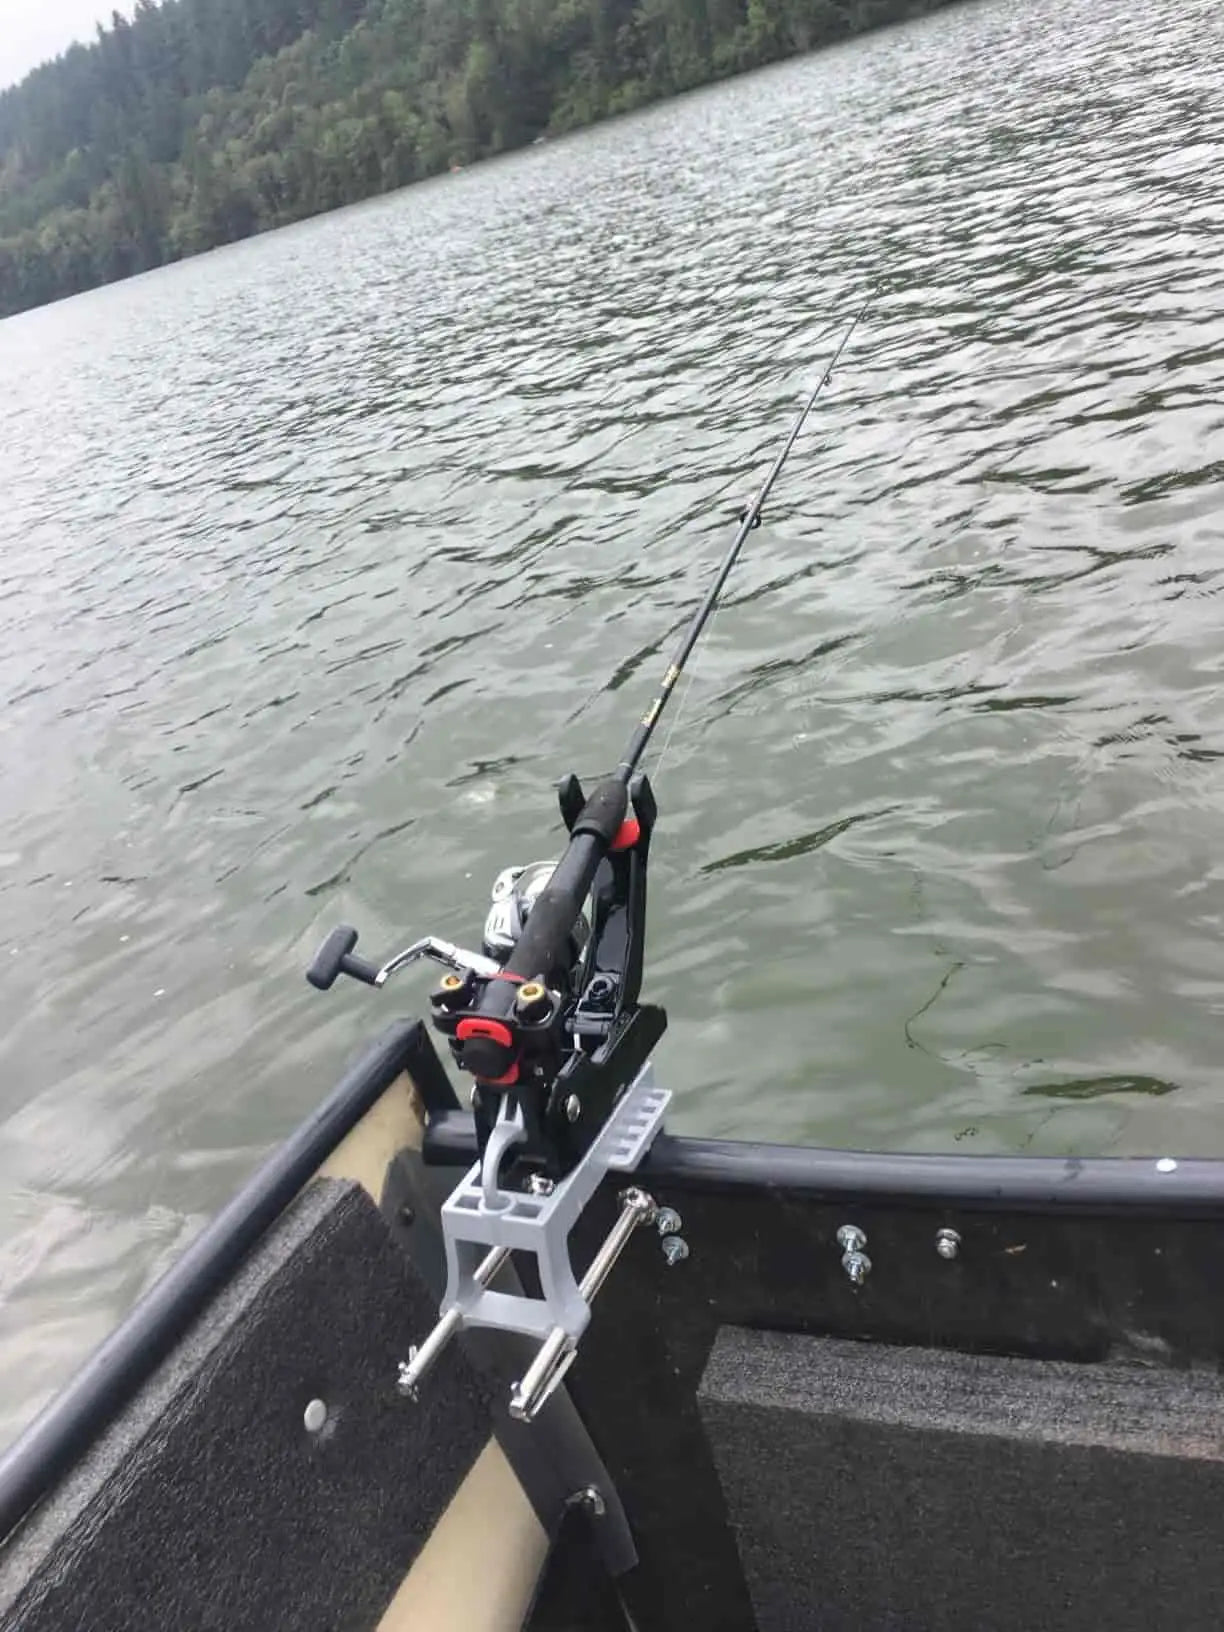 The Top 5 Best Rod Holders for All Types of Fishing